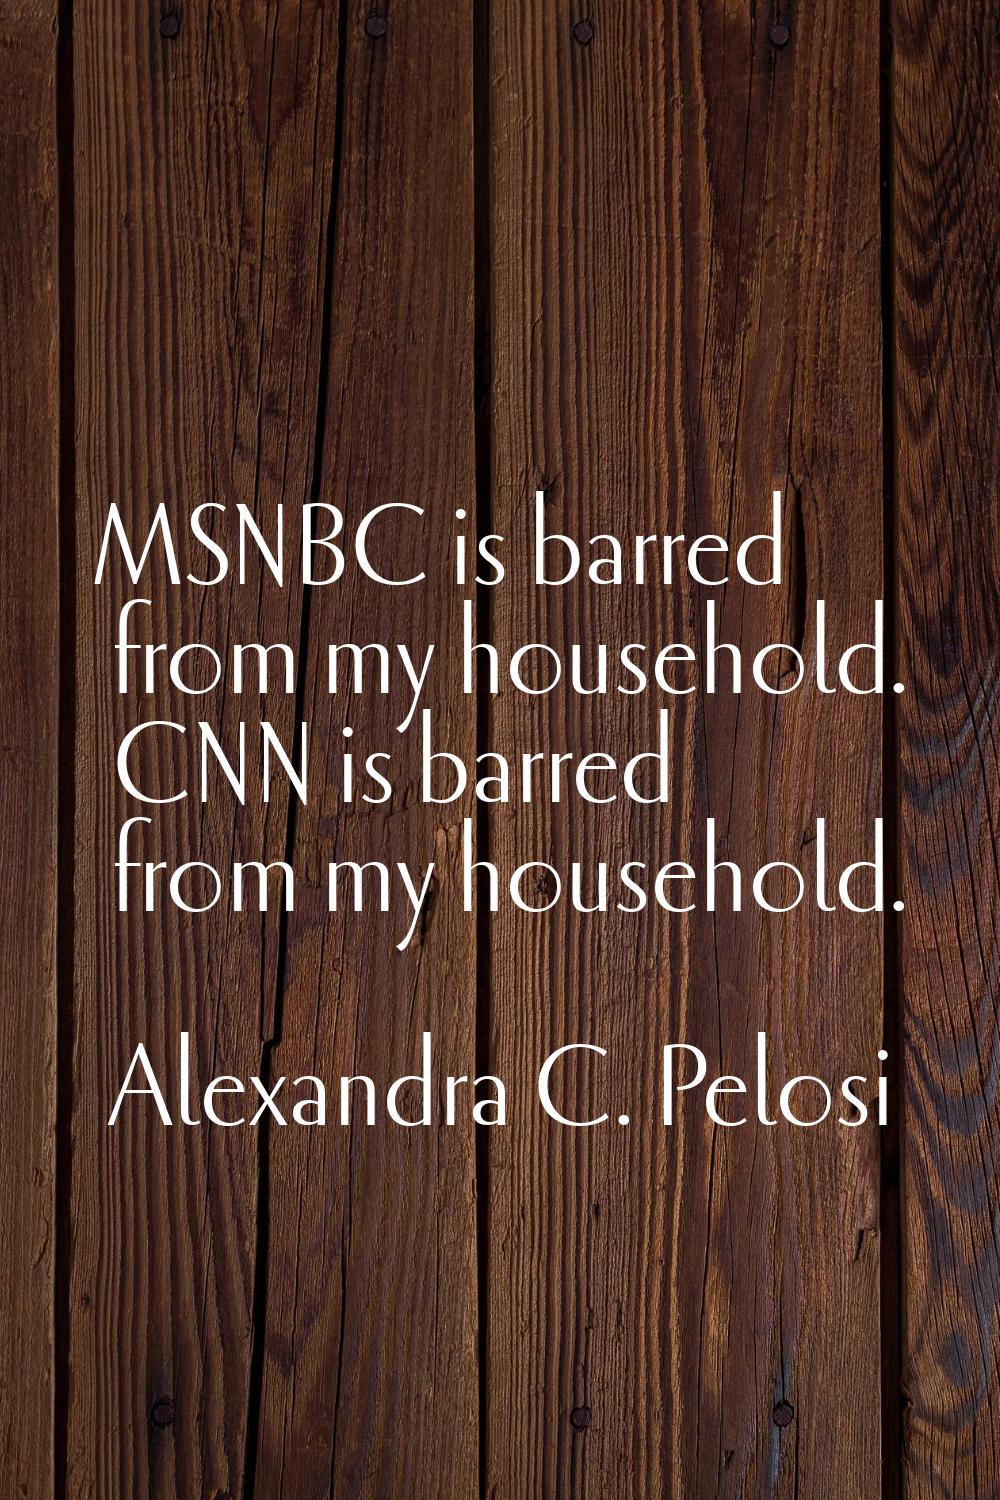 MSNBC is barred from my household. CNN is barred from my household.